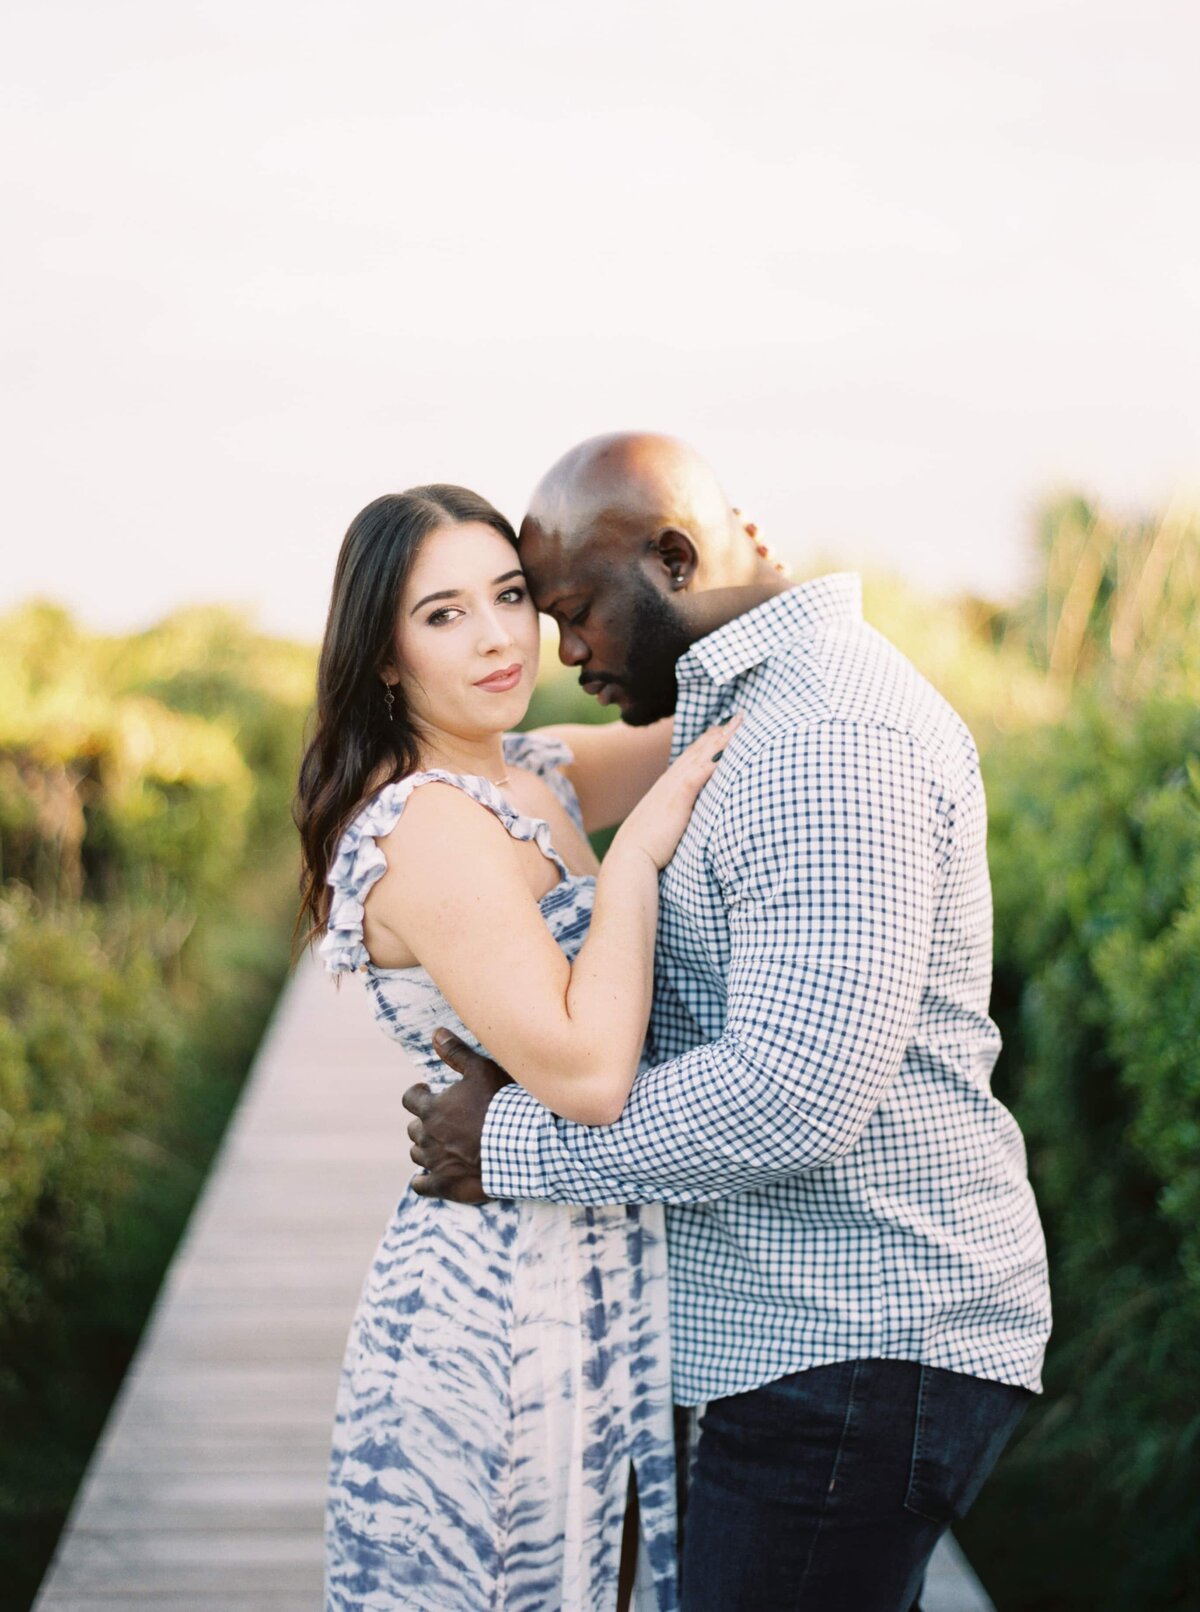 Stunning image of interracial couple during engagement photos at Seabrook Island in Charleston, South Carolina by Danielle Defayette